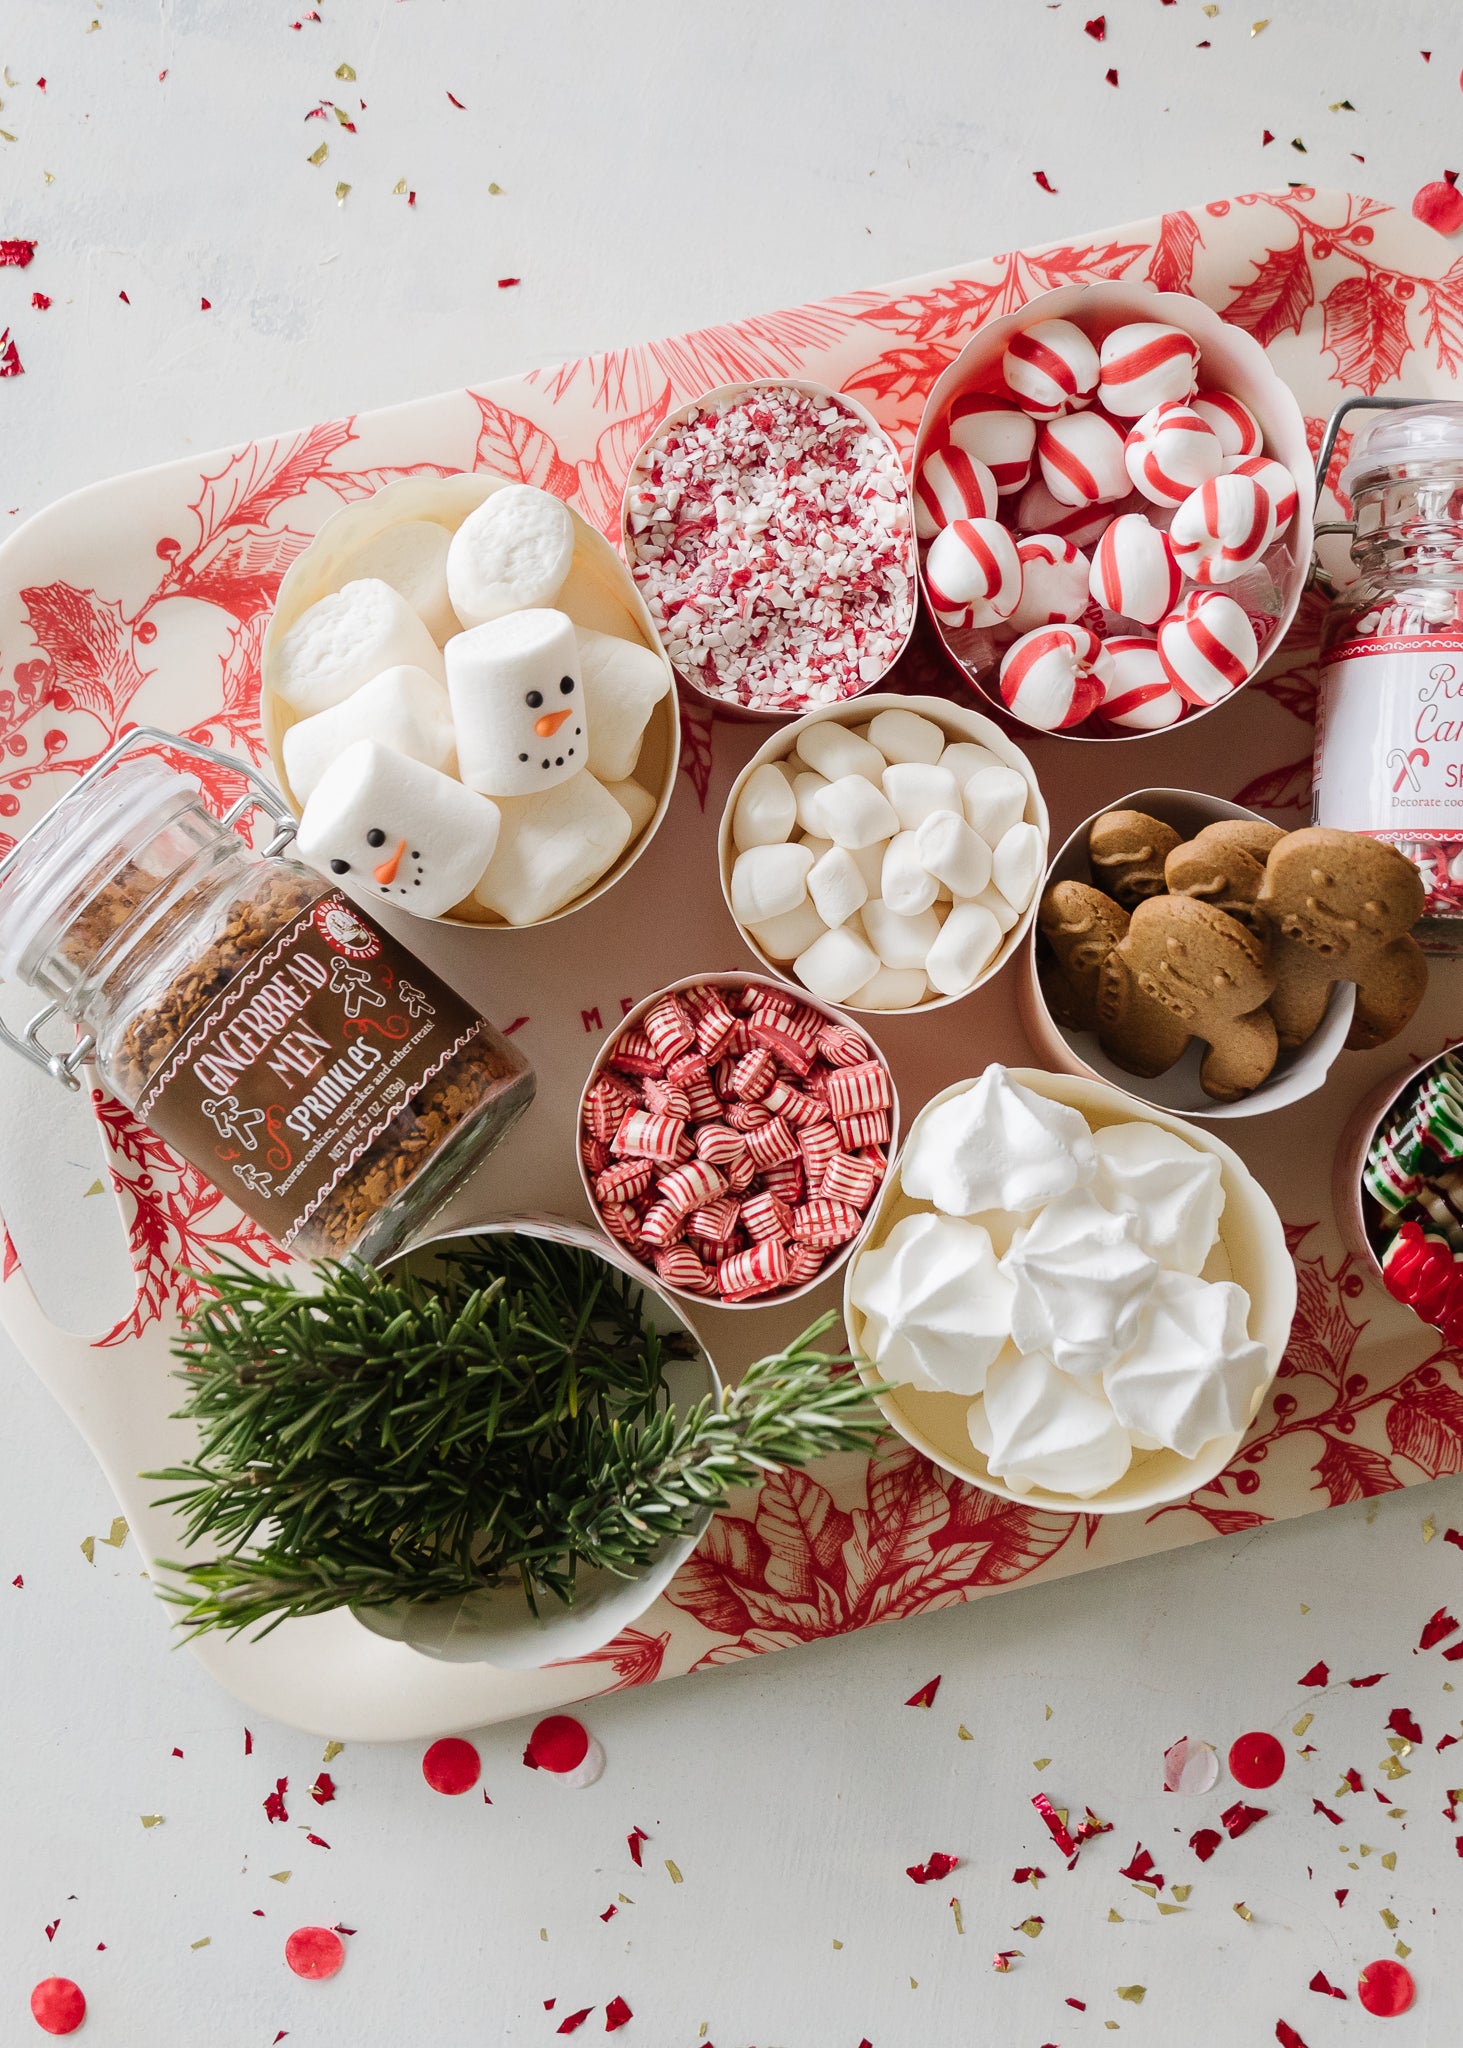 Hot chocolate topping ideas for a Christmas hot cocoa bar.